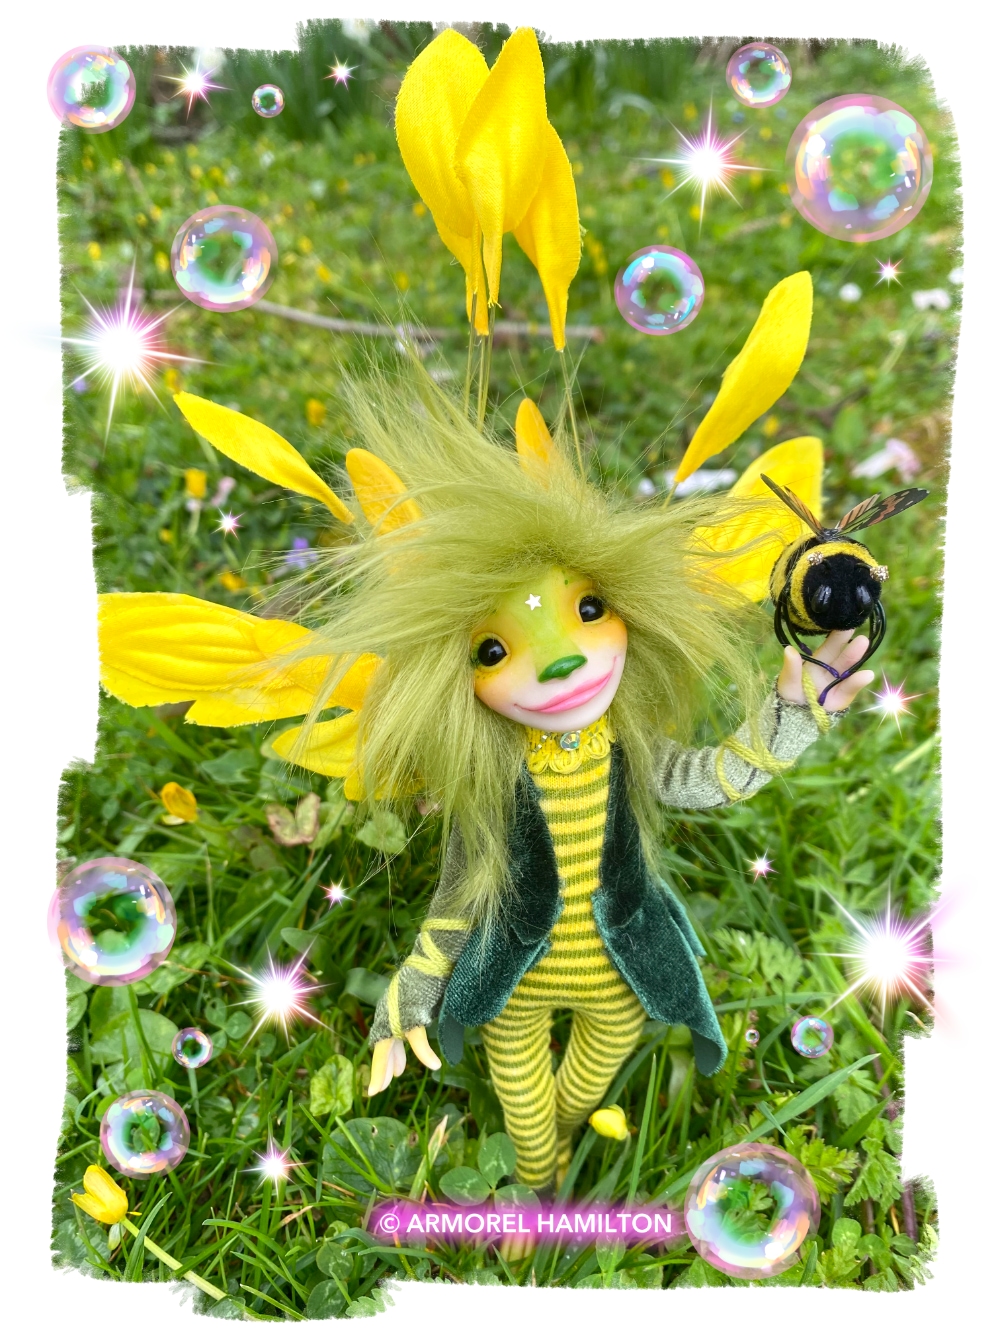 Small Yellow Fairy Fayble with Bumble Bee